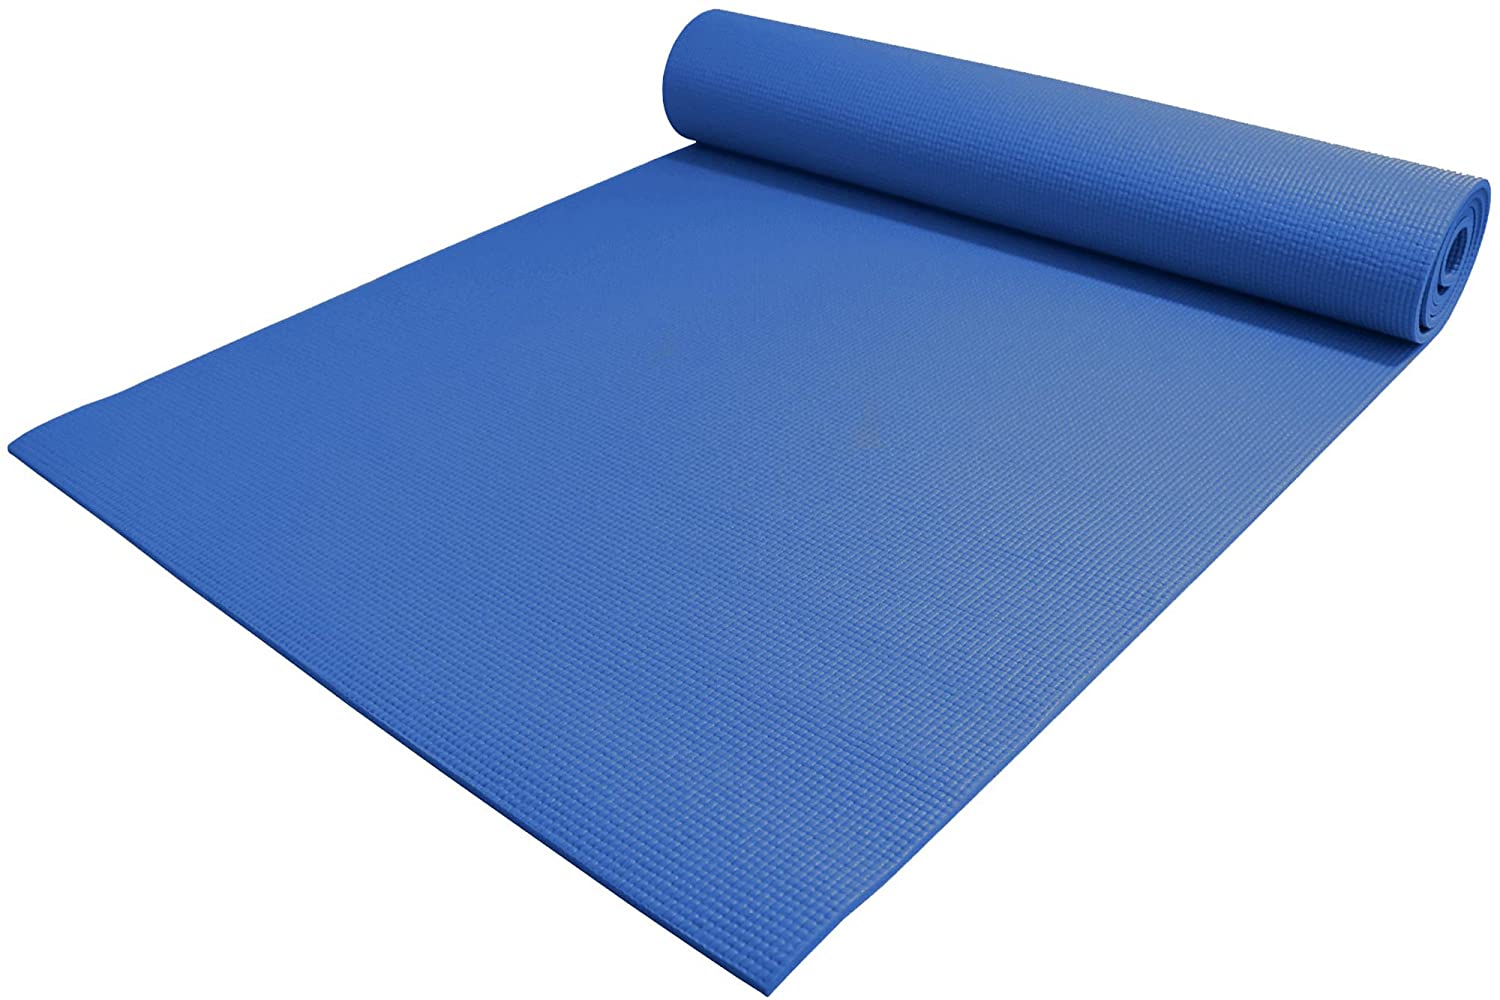 The The 10 Best Hot Yoga Mats to Buy in 2021 - To Enhance Your Practice